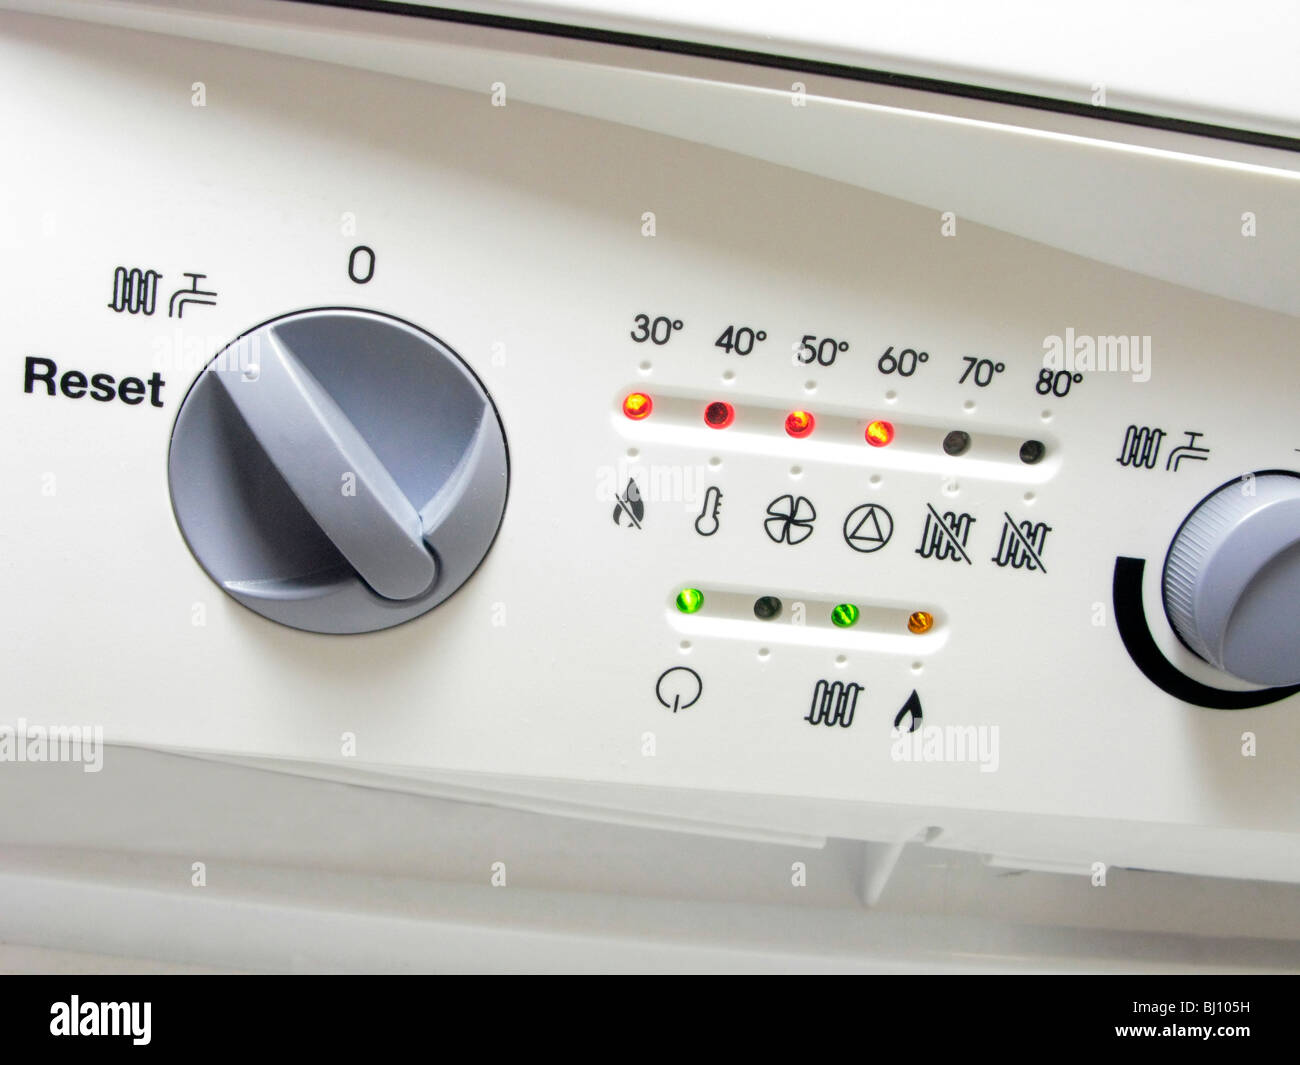 facia panel on an A rated condensing boiler showing switches & temperature gauge Stock Photo